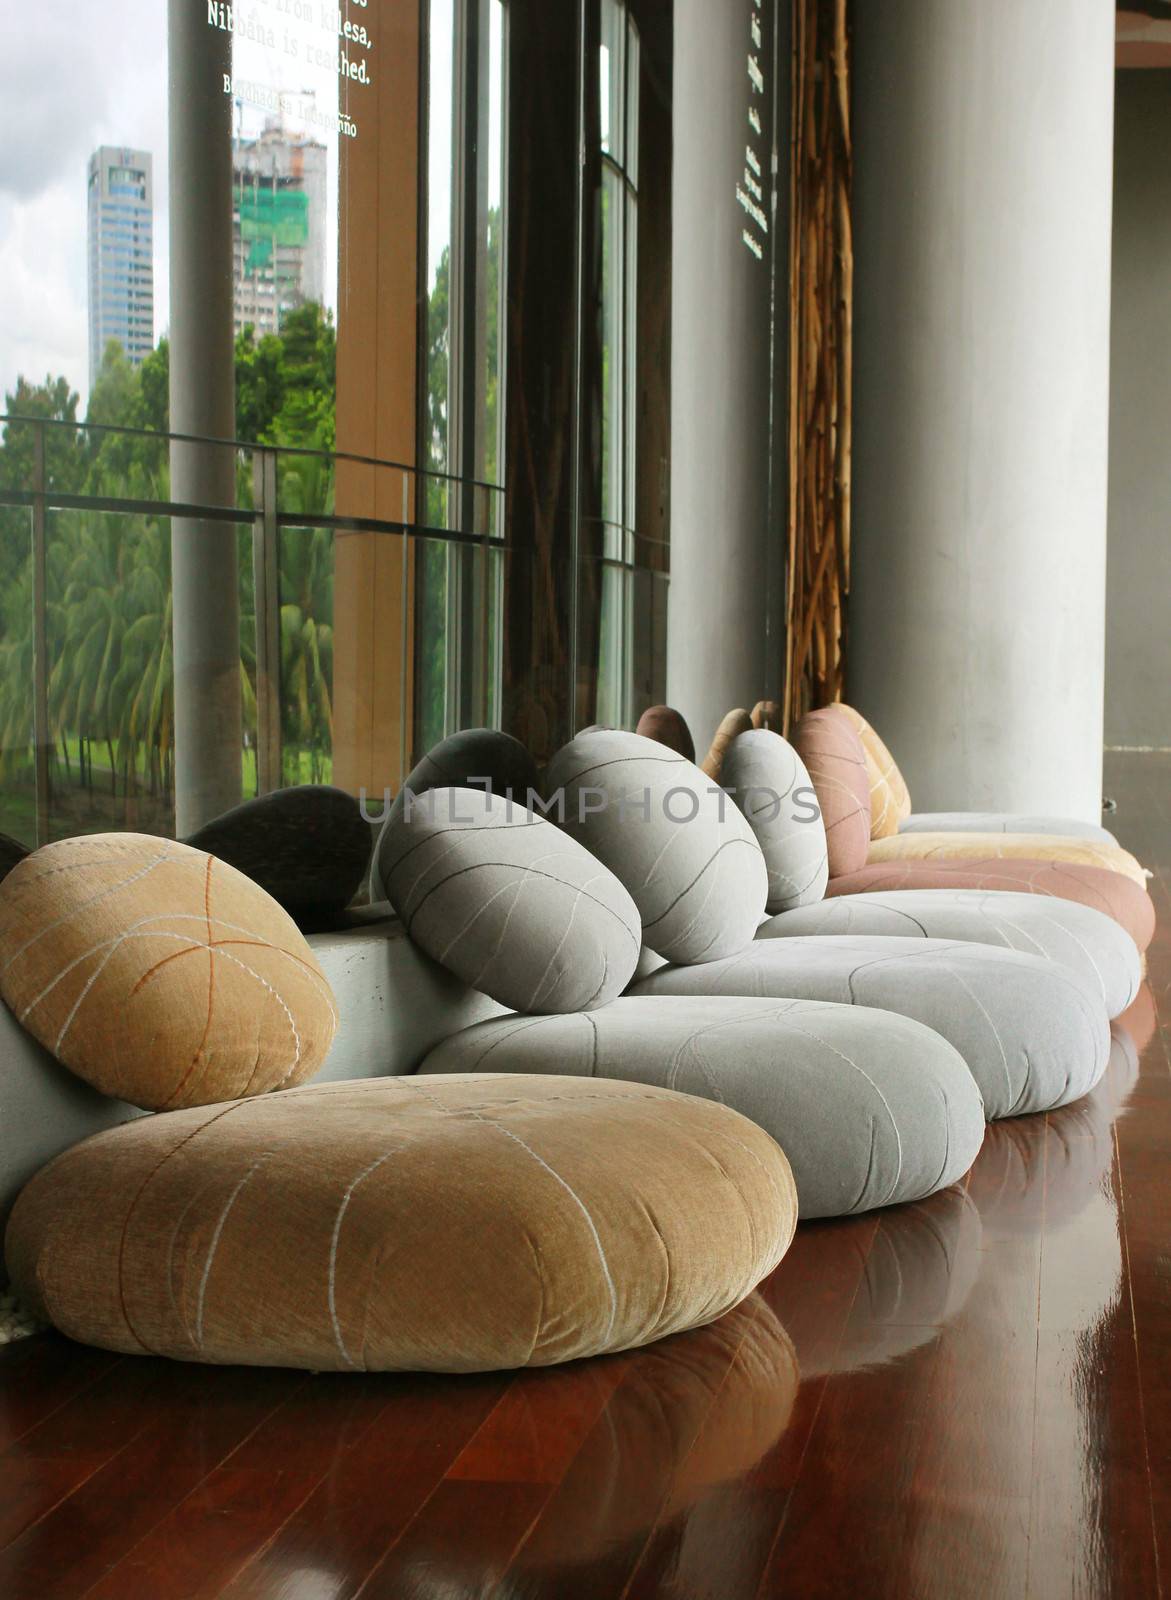 Cushion seat in quiet interior room for meditation by nuchylee